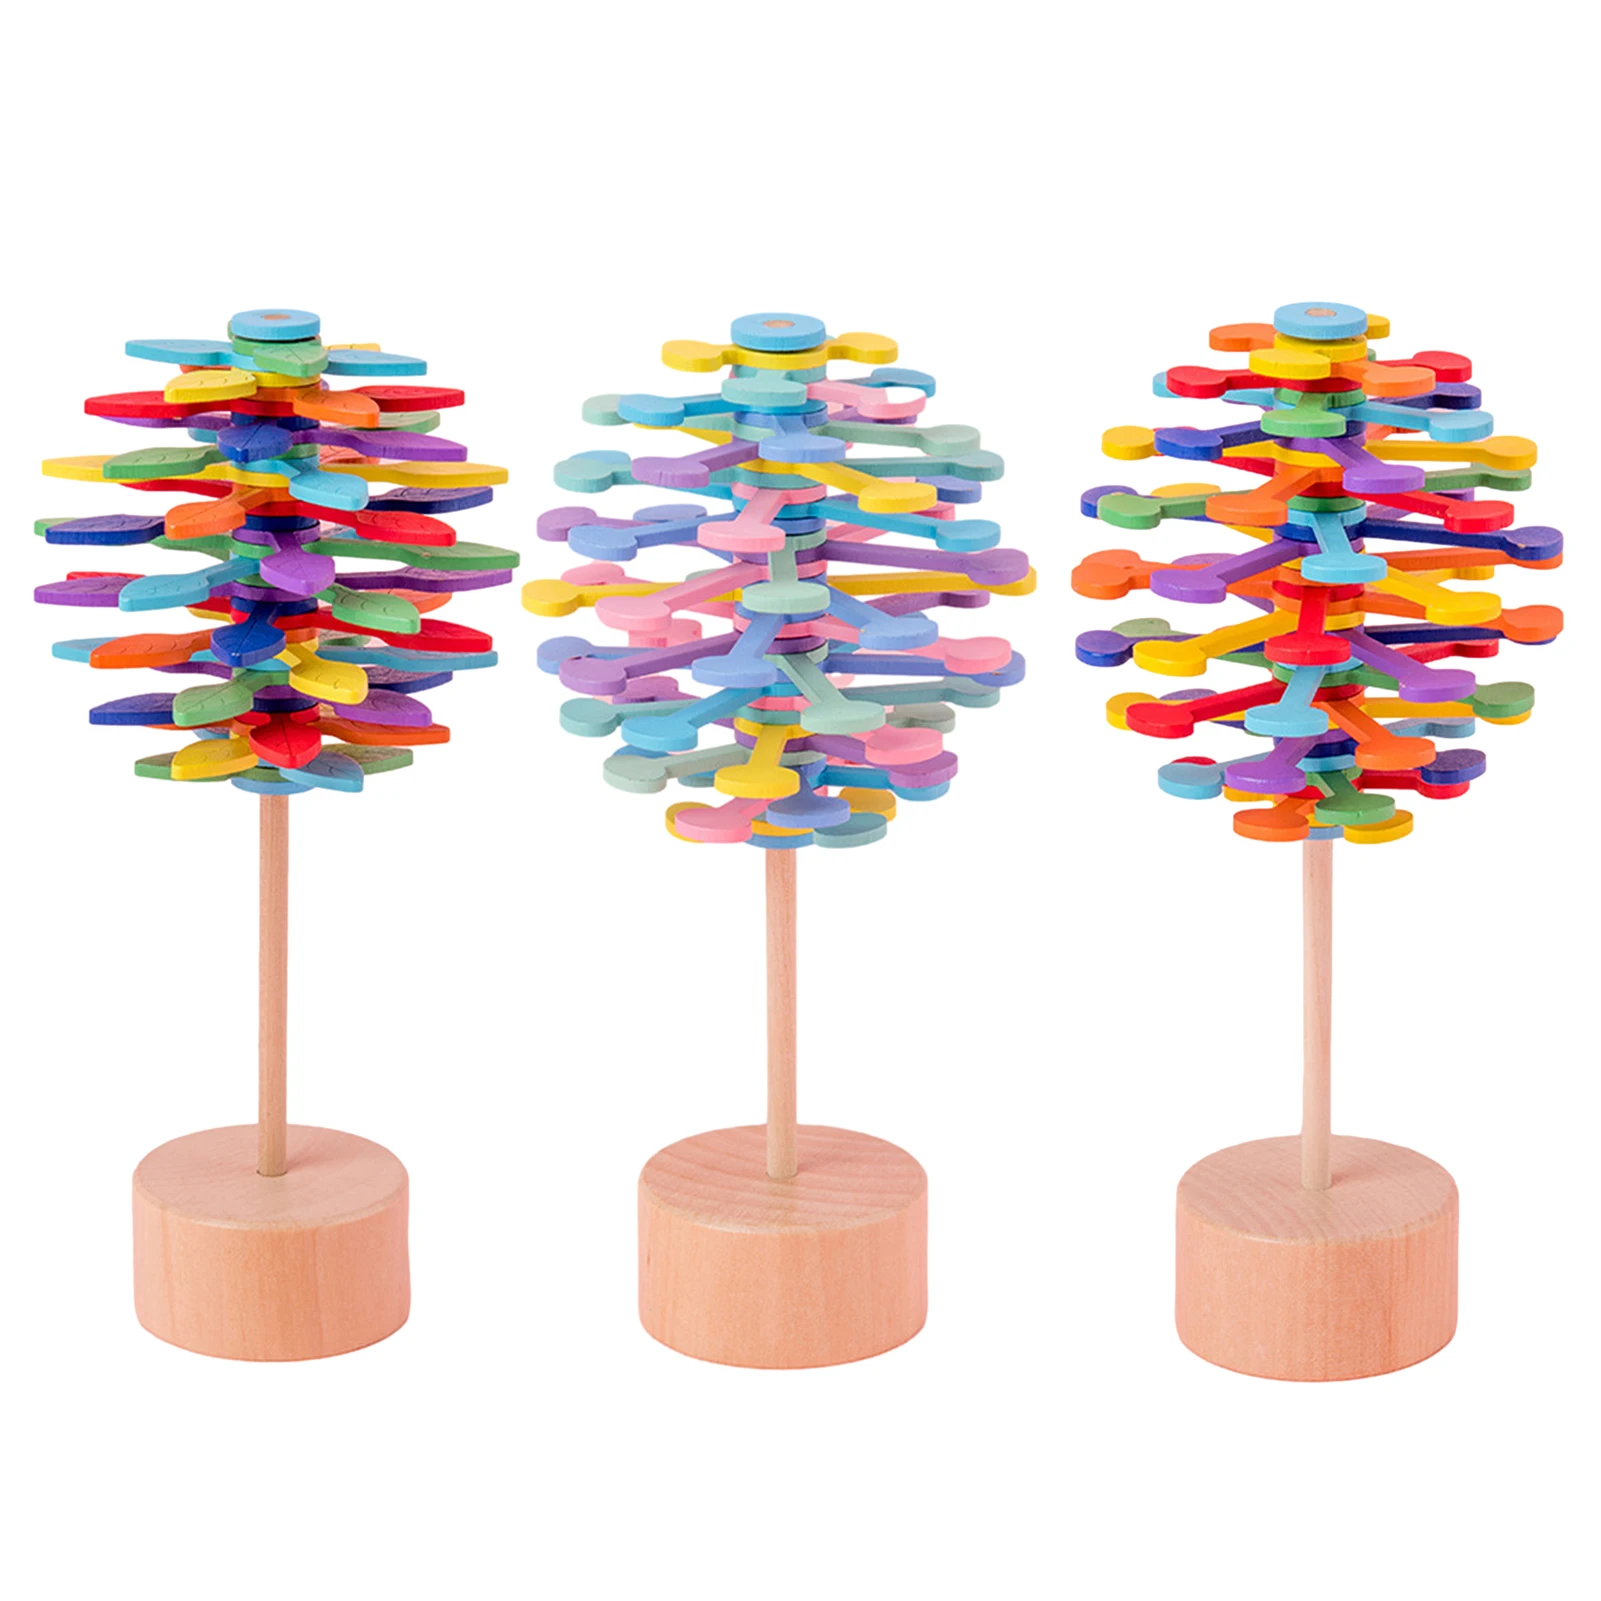 

Wooden Spiral Lollipop Stress Relif Toy Spinning Magic Wand Decompression Kit Fibonaccis Sequences Toy Art Decoration Kids Gift